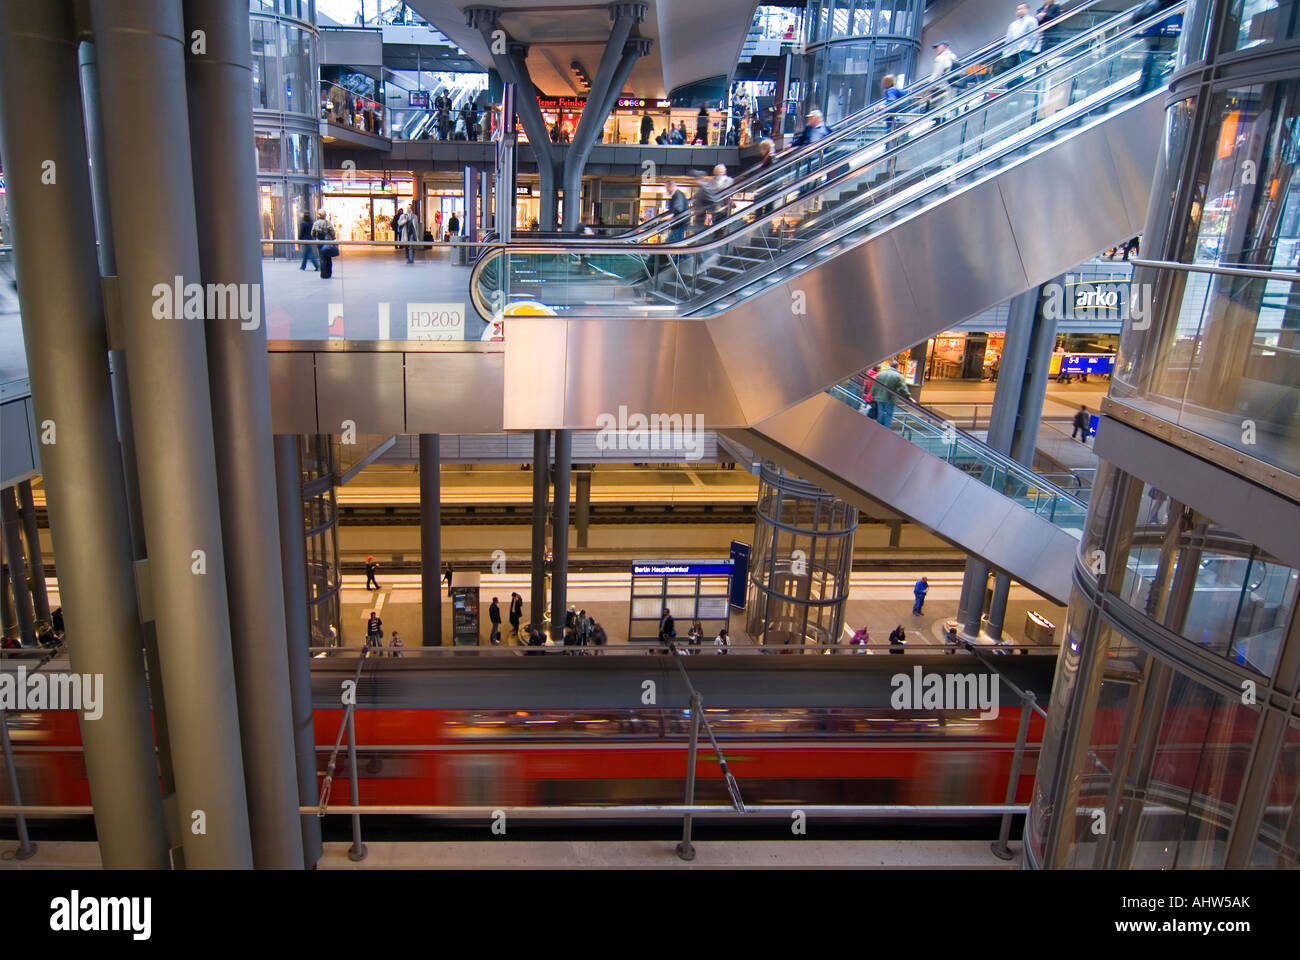 Horizontal wide angle of the interior of Berlin Hauptbahnhof 'Berlin Central Station', showing all five levels. Stock Photo